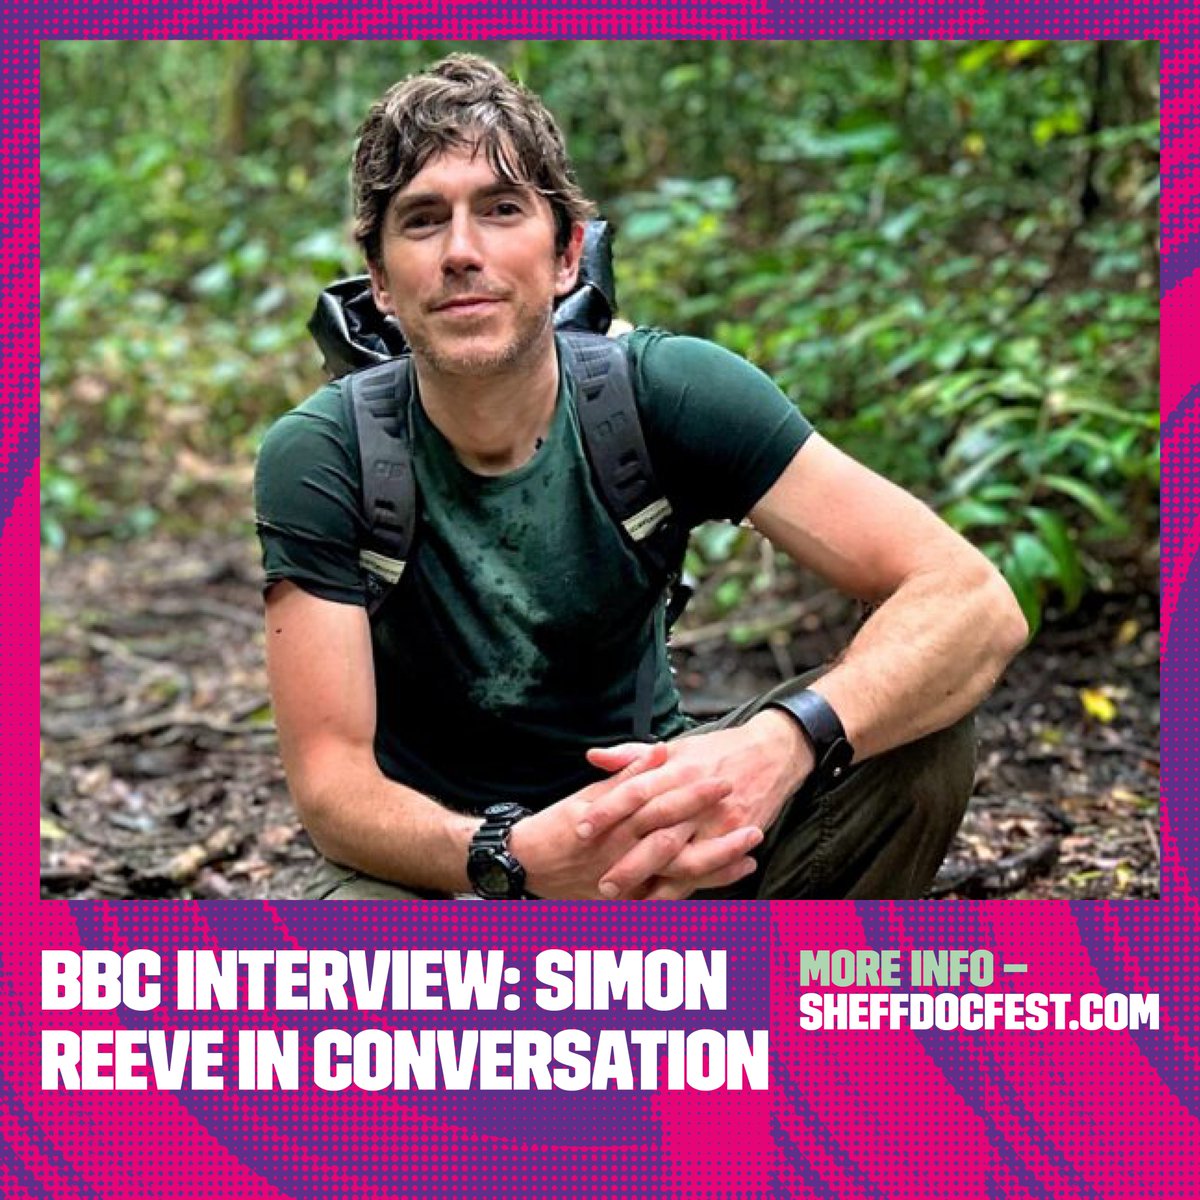 Delighted to be appearing at the magnificent @sheffdocfest 'in conversation' next month w/Jack Bootle BBC - and taking audience questions/ getting a grilling I hope - tickets below. Fri 14 June Crucible Theatre #Sheffield sheffdocfest.com/composition/bb…